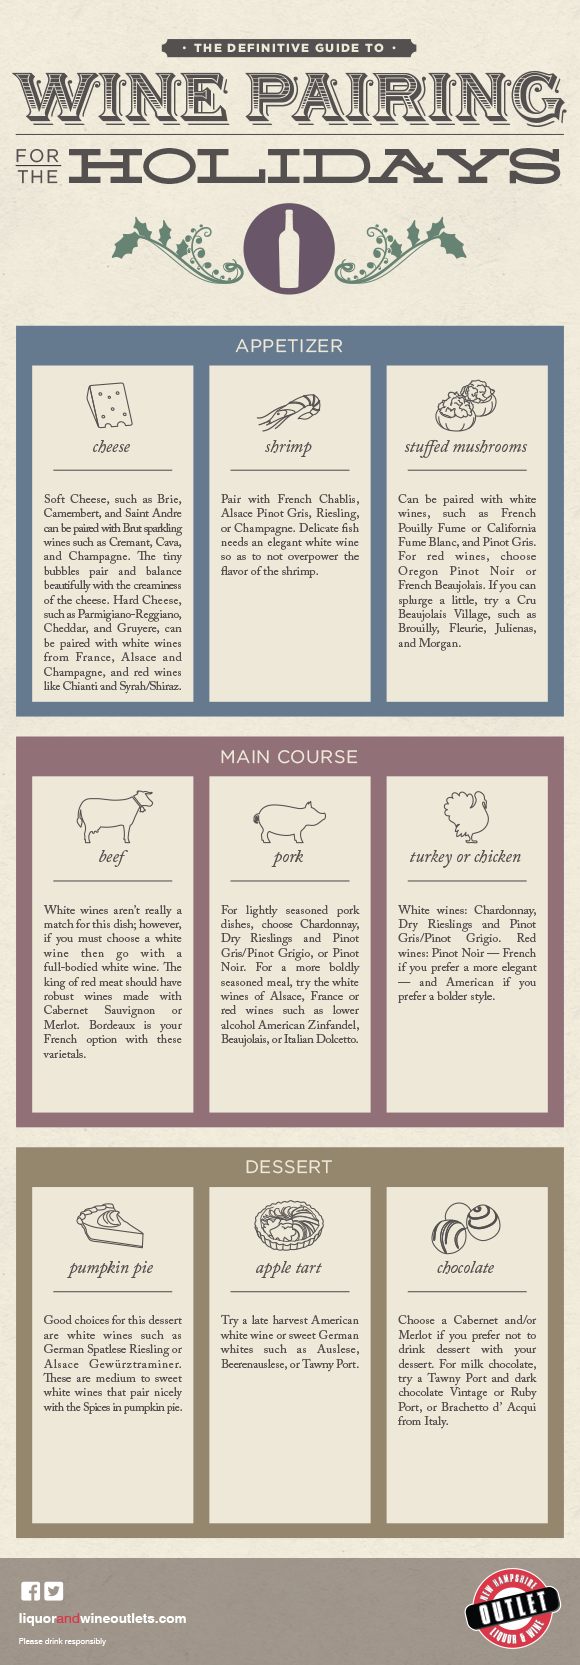 Wine Pairing for the Holidays Infographic